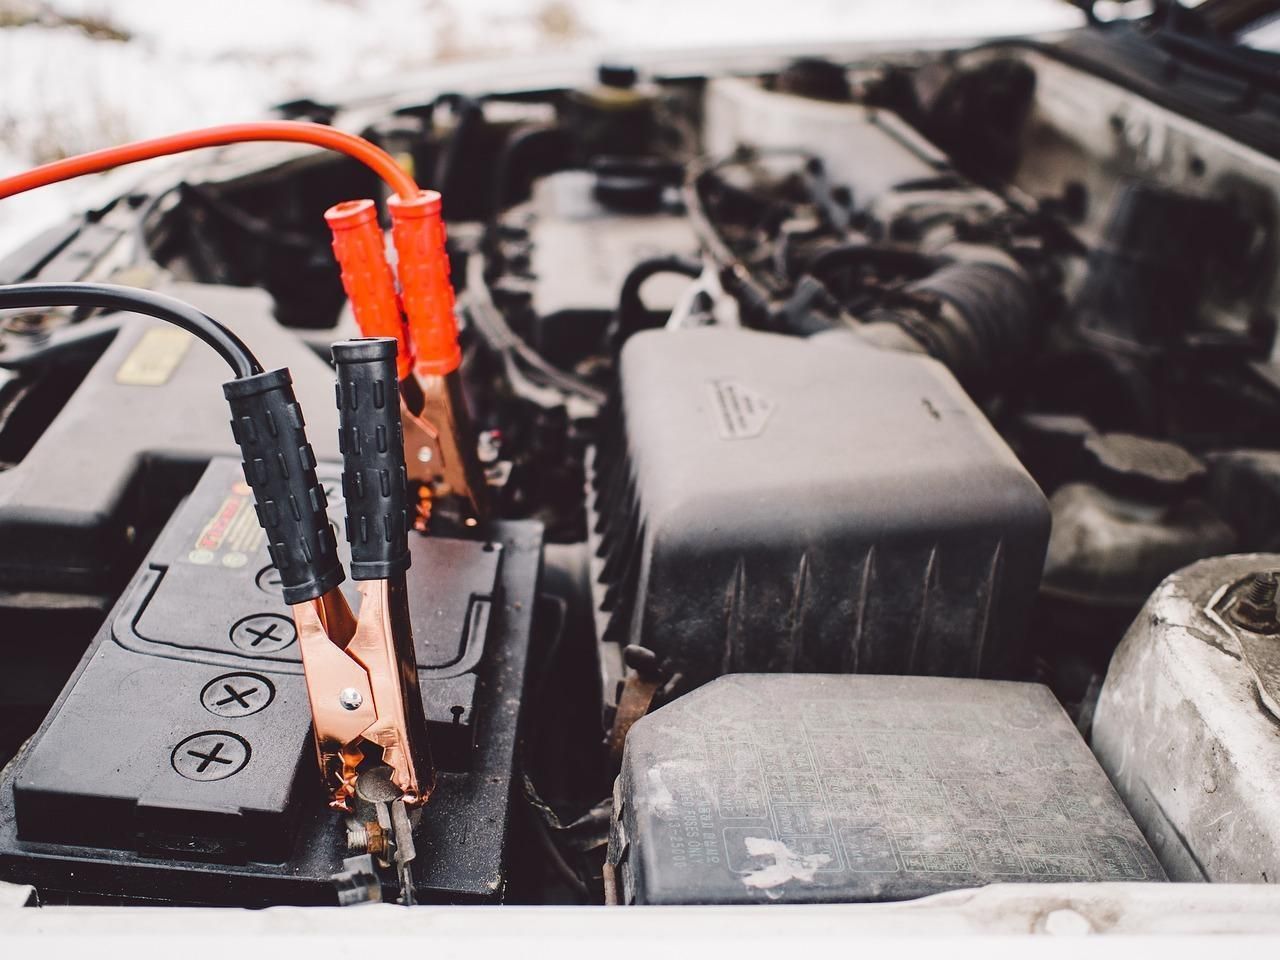 Battery Service at ﻿Ryan's Auto Care﻿ in ﻿Lake Mills, WI﻿﻿